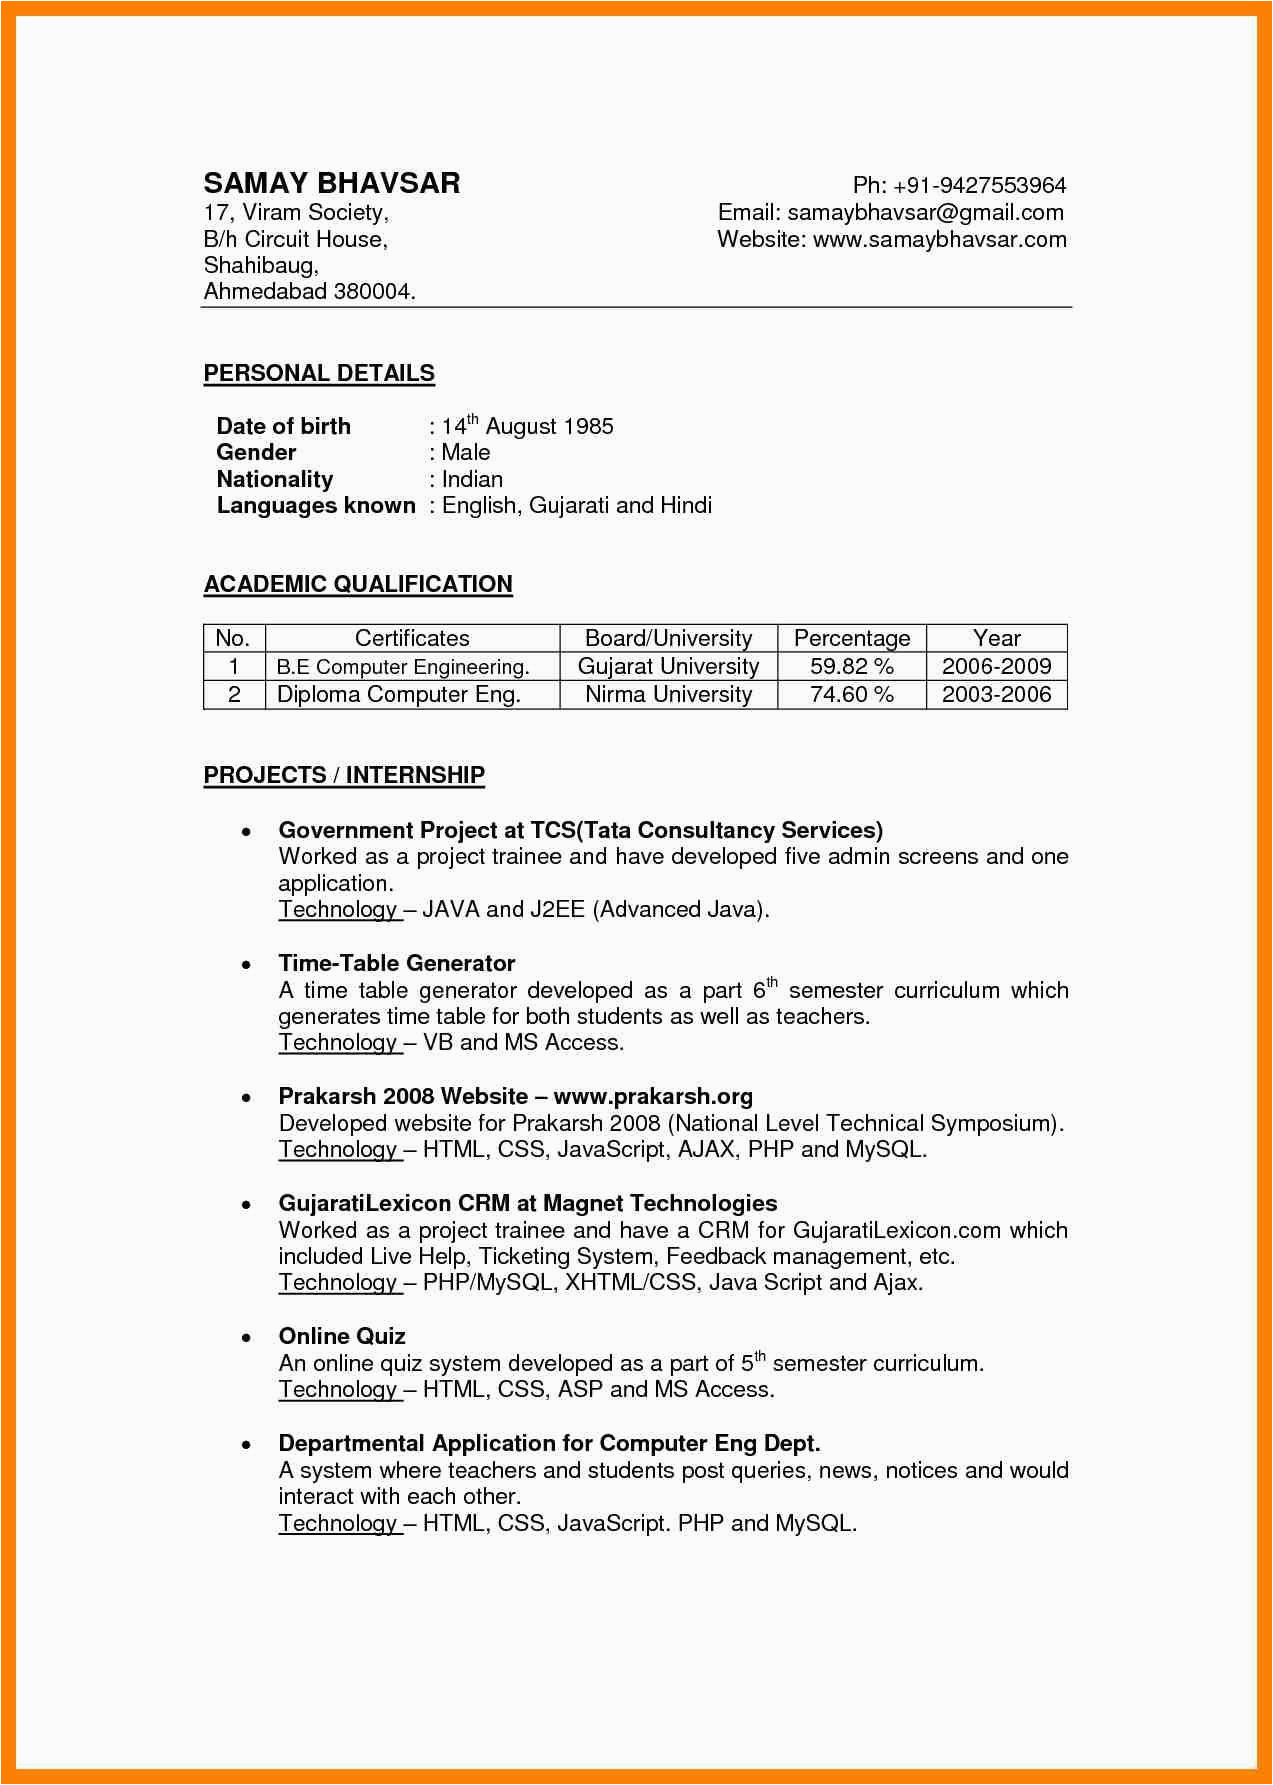 Resume Samples for College Students In India Indian Student Resume format for Job Best Resume Examples